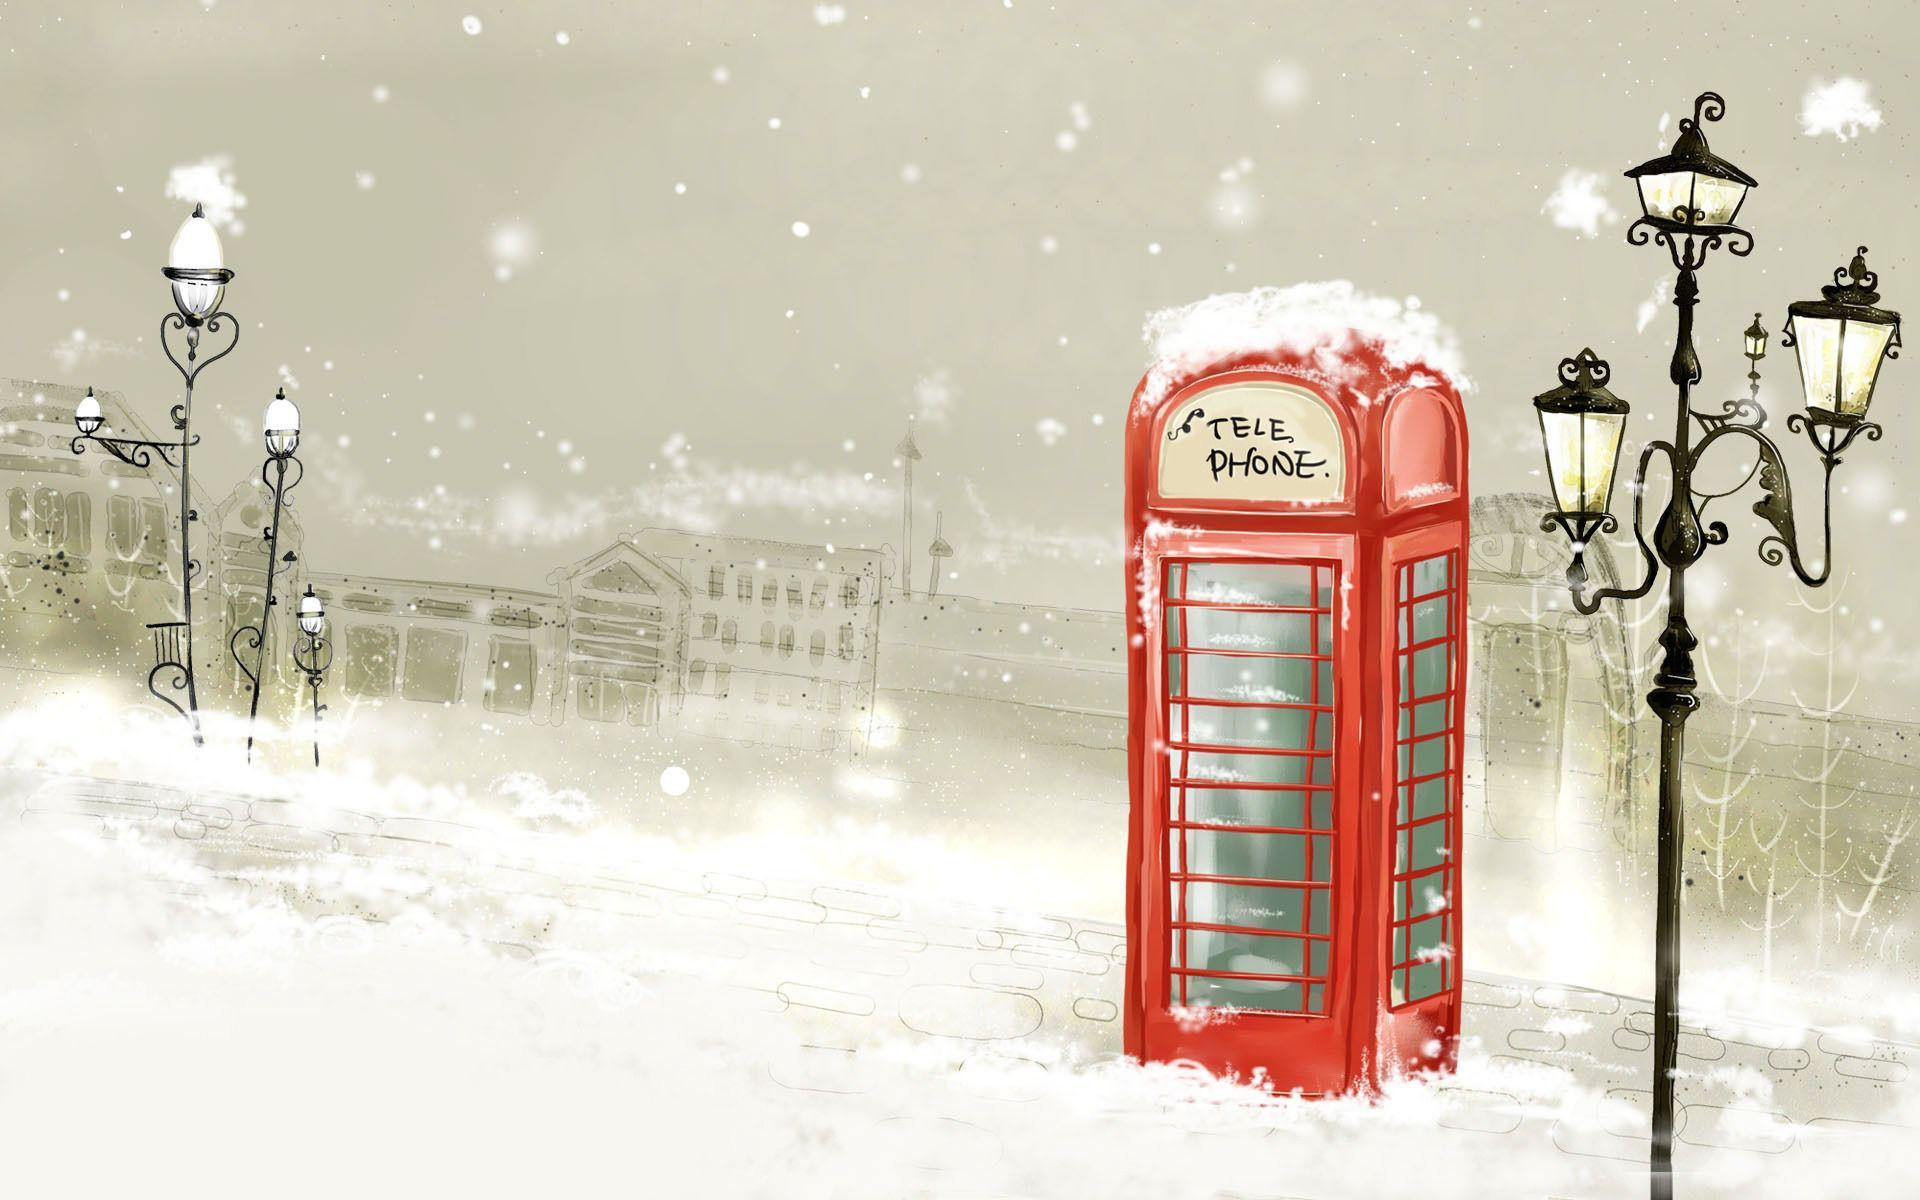 Telephone booth in the snow wallpaper. Cold and Wintery